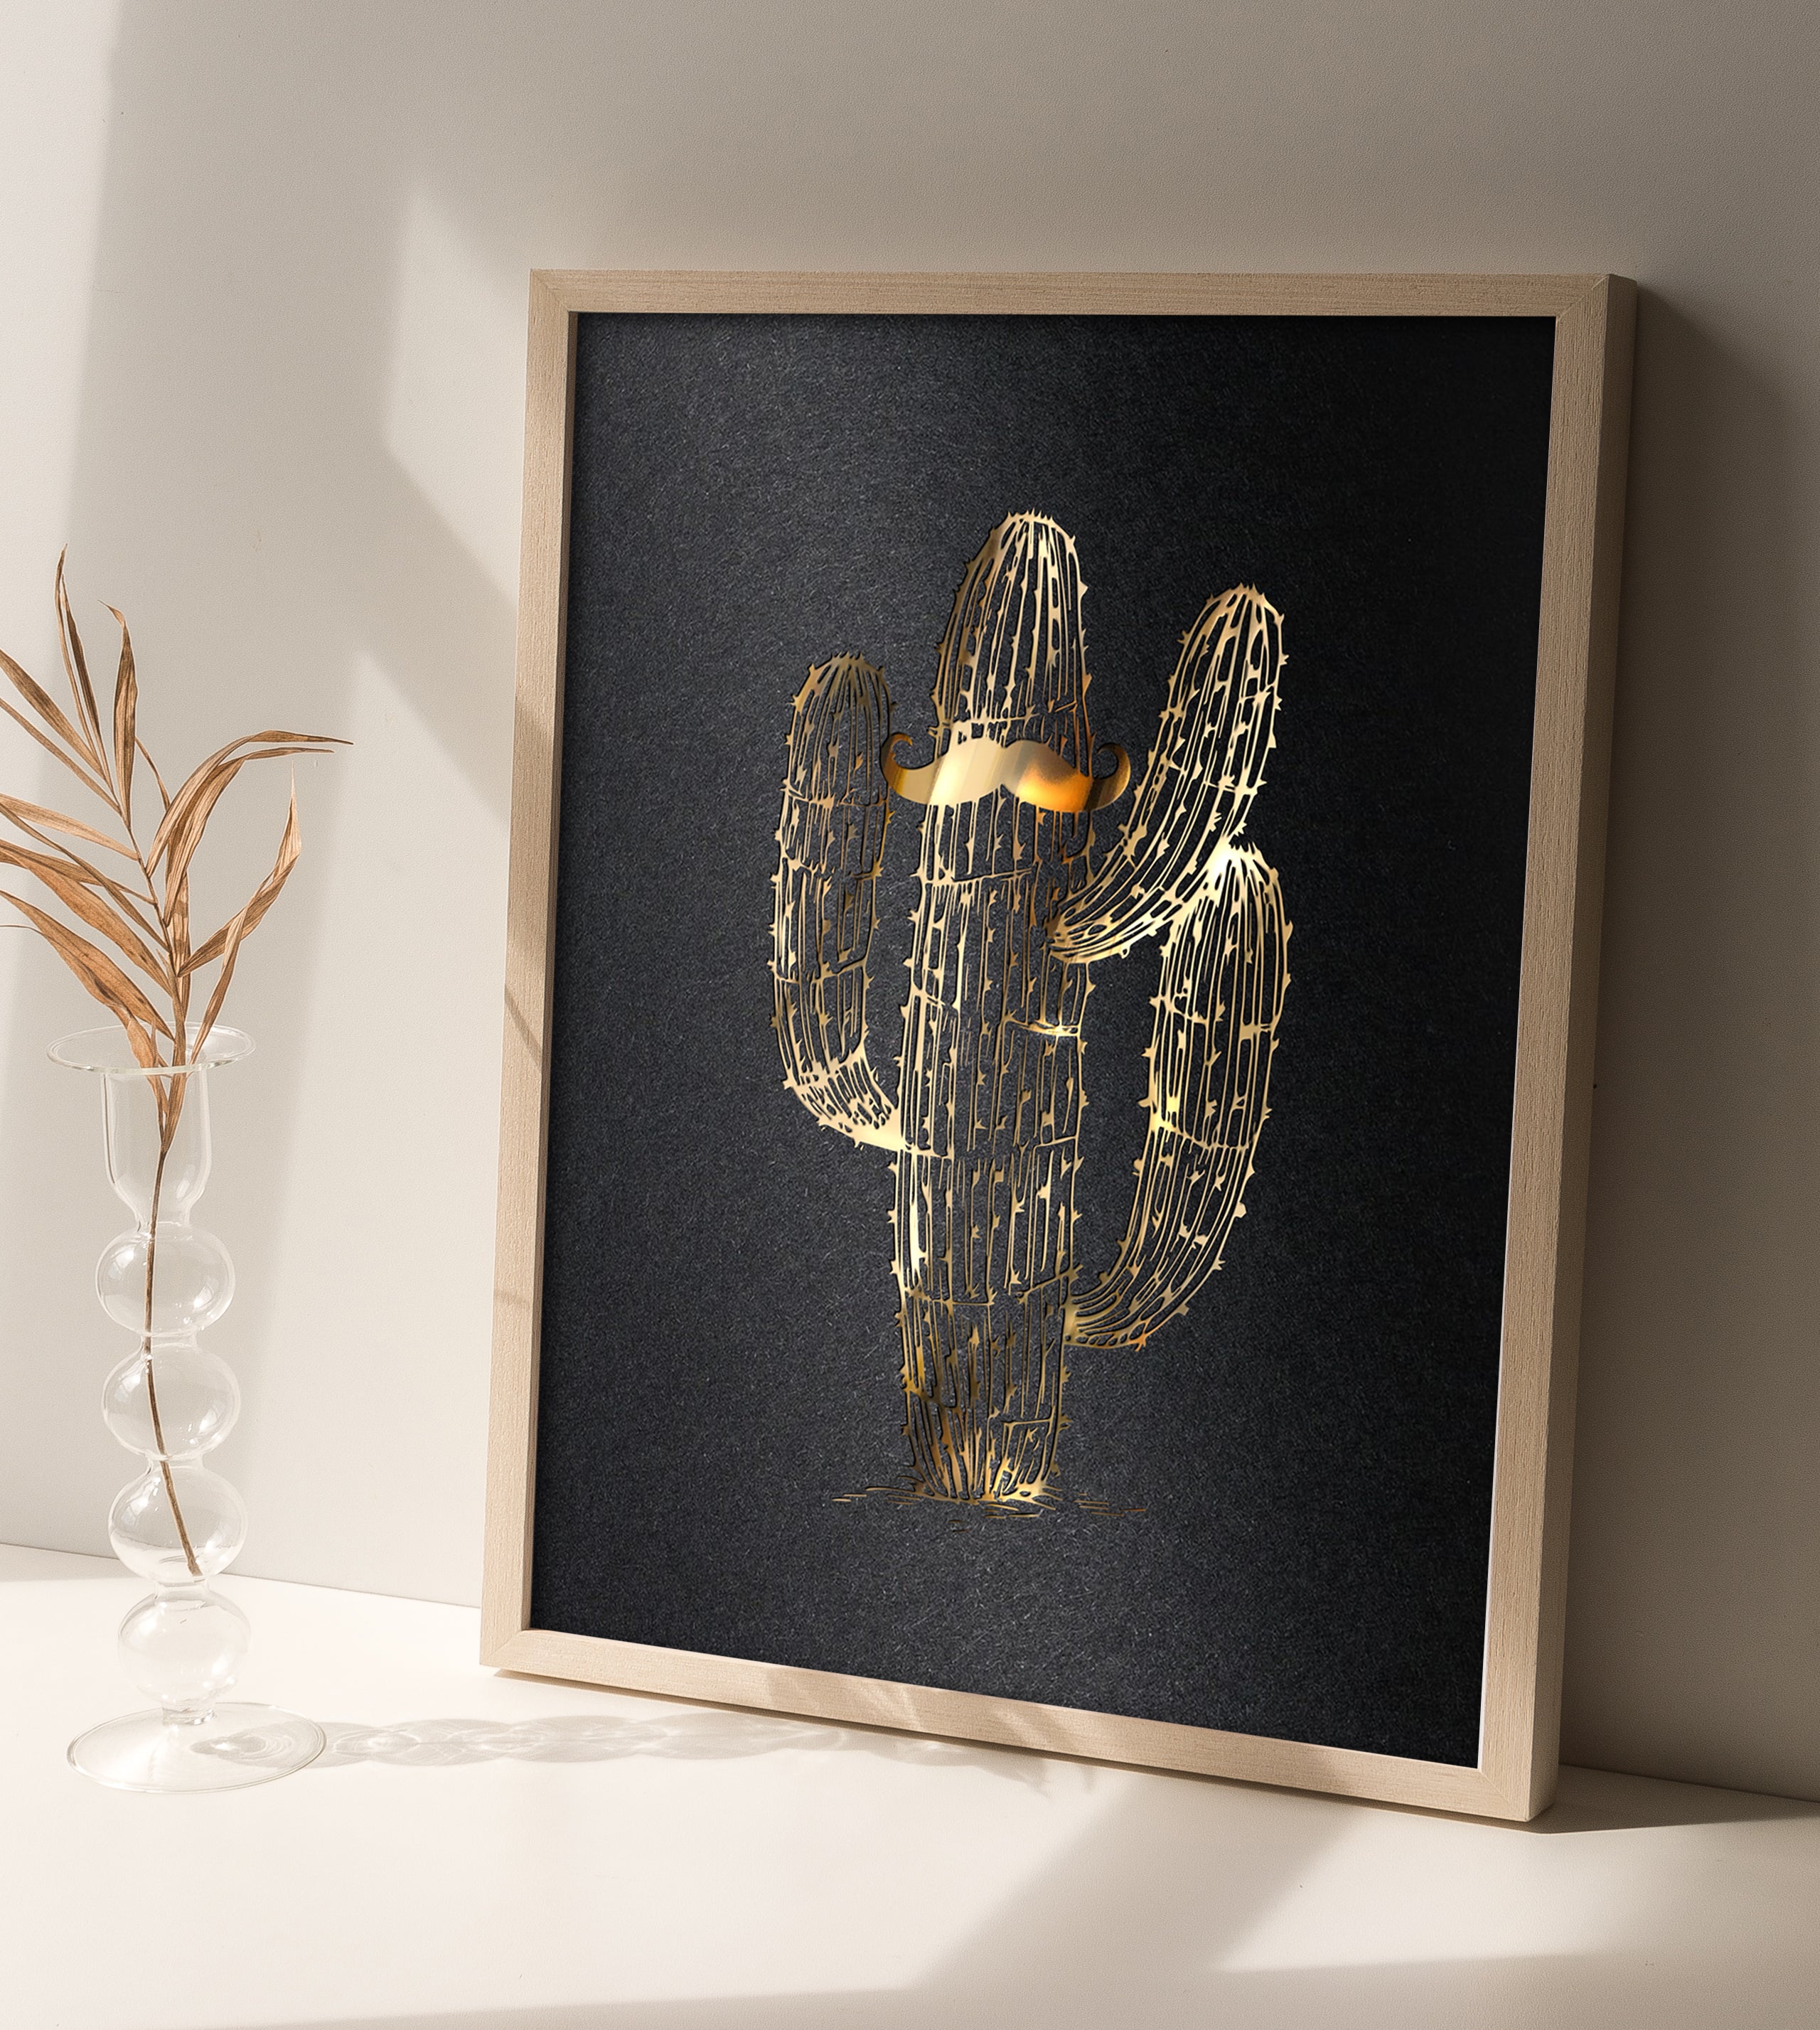 Cactus stacki or by Arteonn Letterpress Displayed in Home Setting